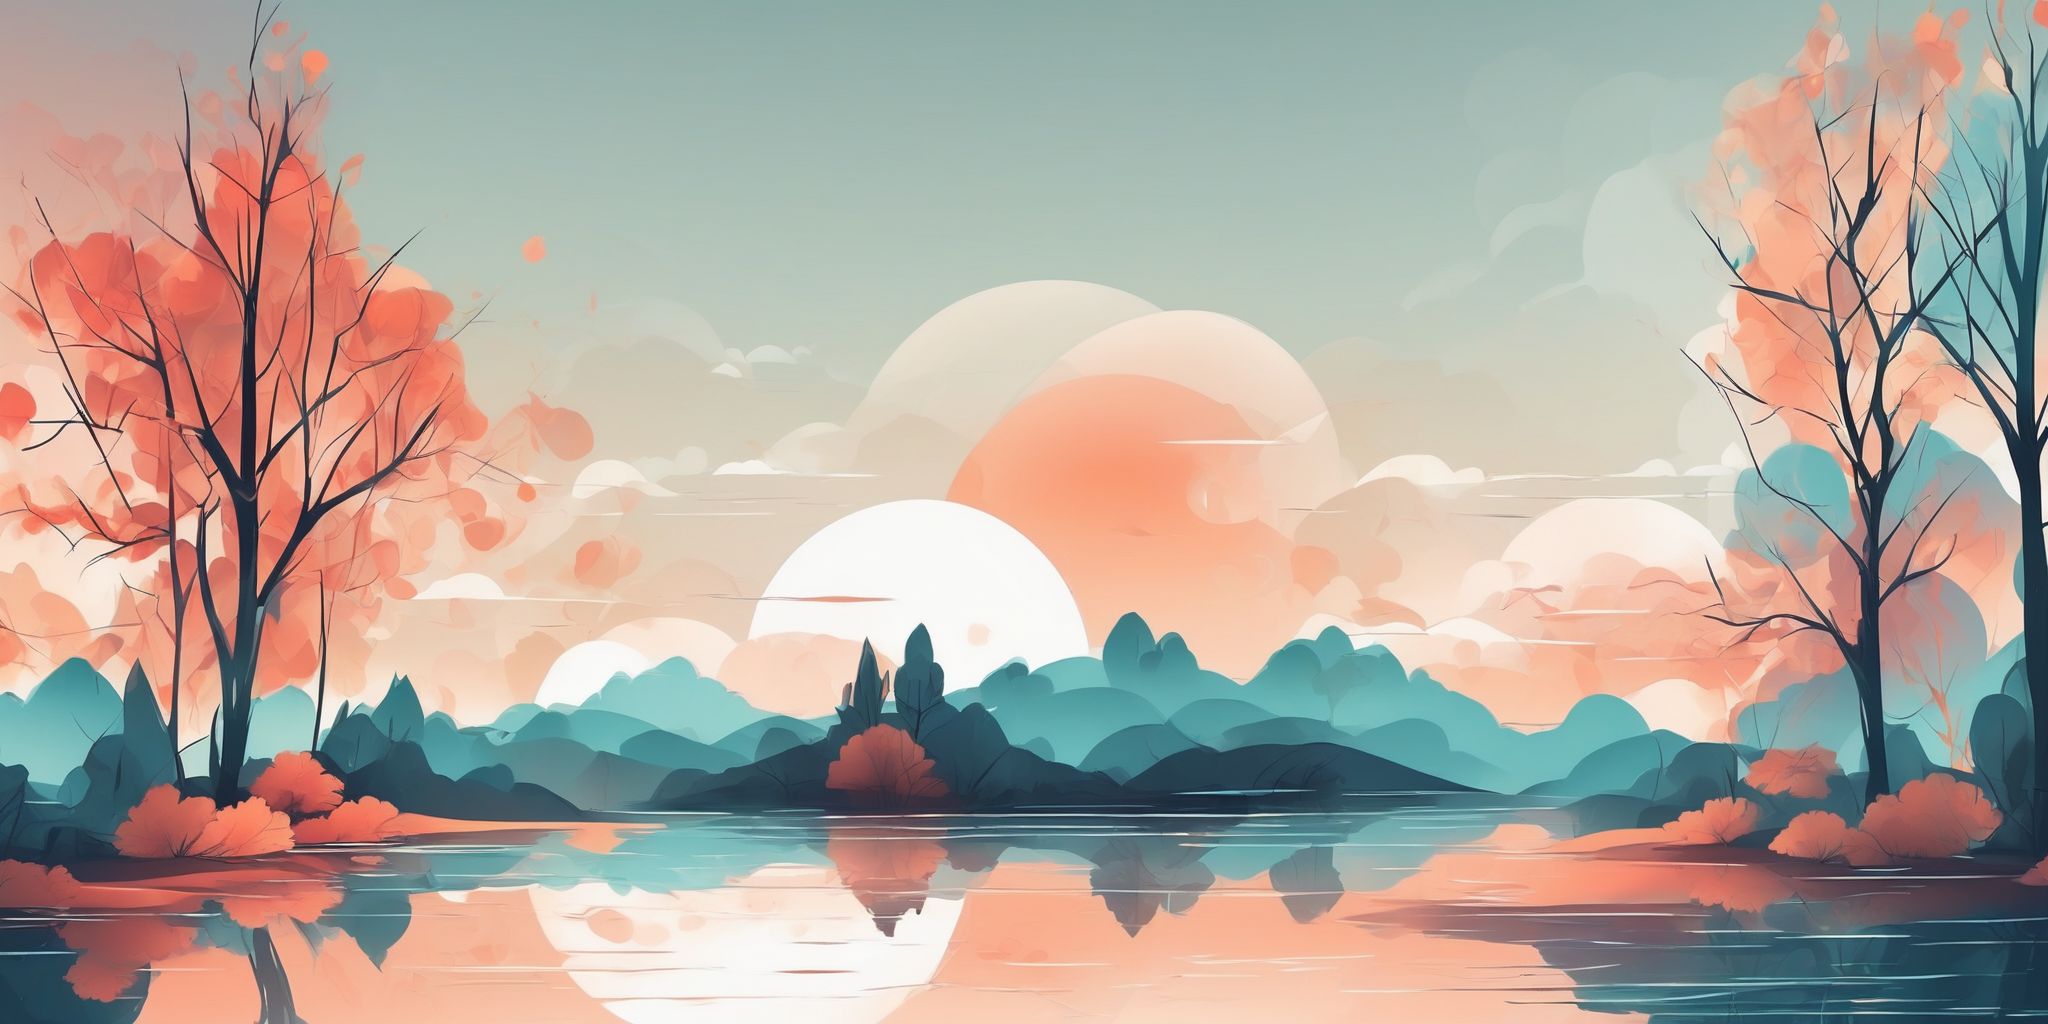 Reflection in illustration style with gradients and white background